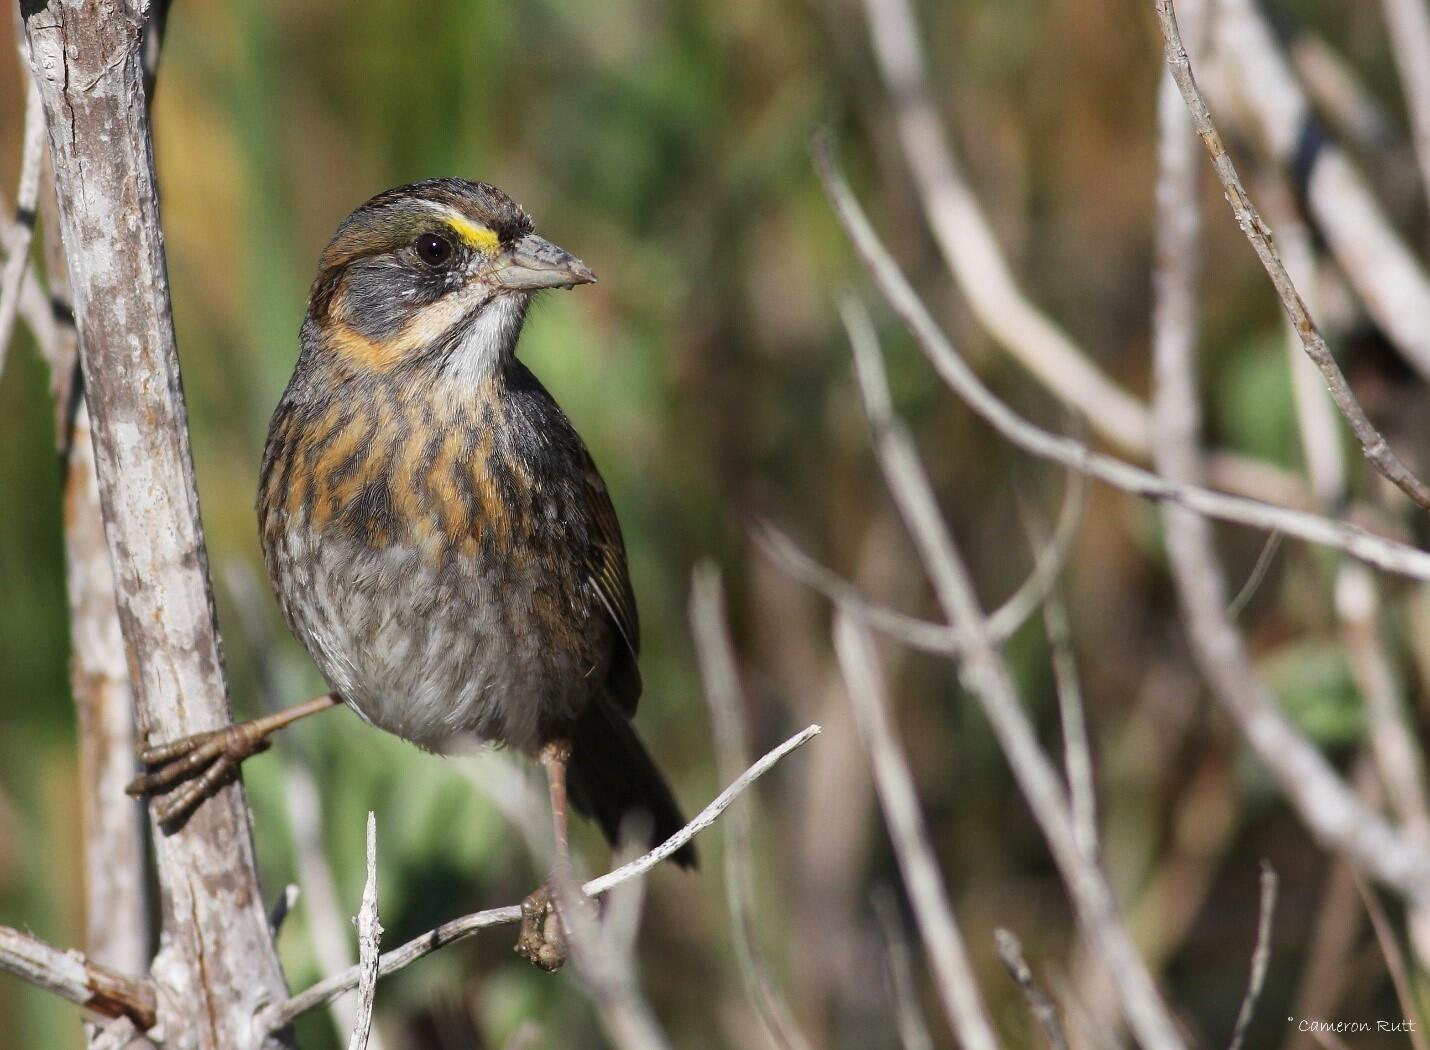 More than 3.5 million, or half of the world’s, Seaside Sparrows depend on Louisiana’s estuarine marshes.